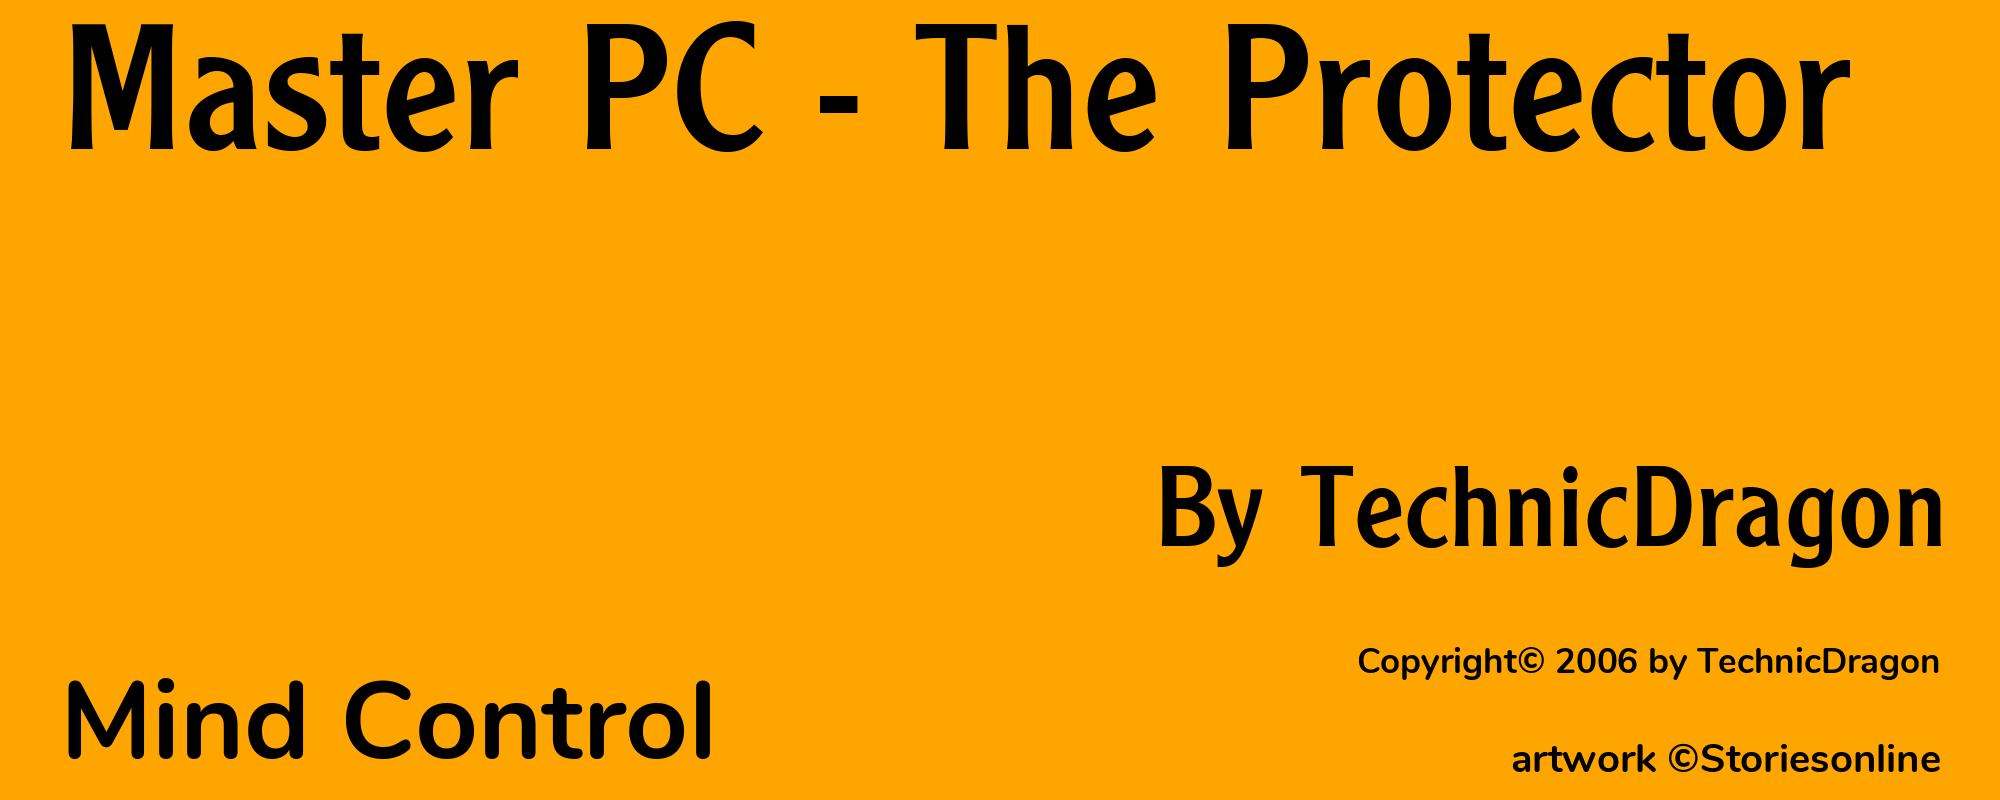 Master PC - The Protector - Cover